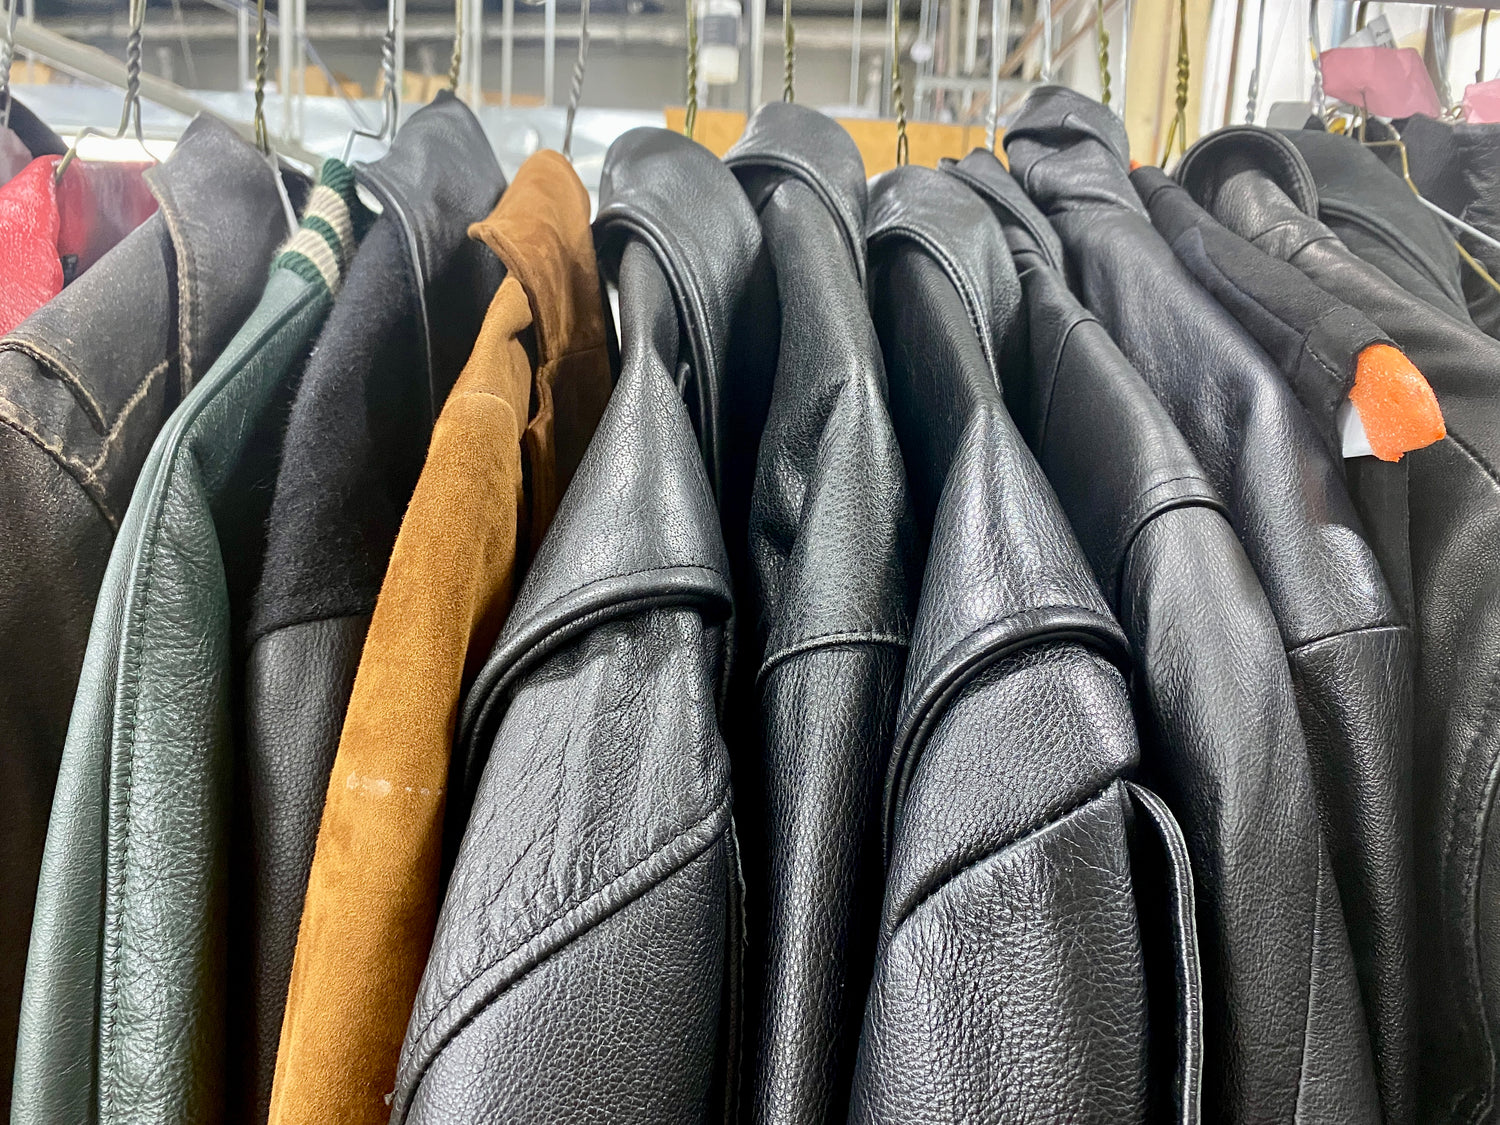 Leather cleaning services are offered at leathercareusa.com 